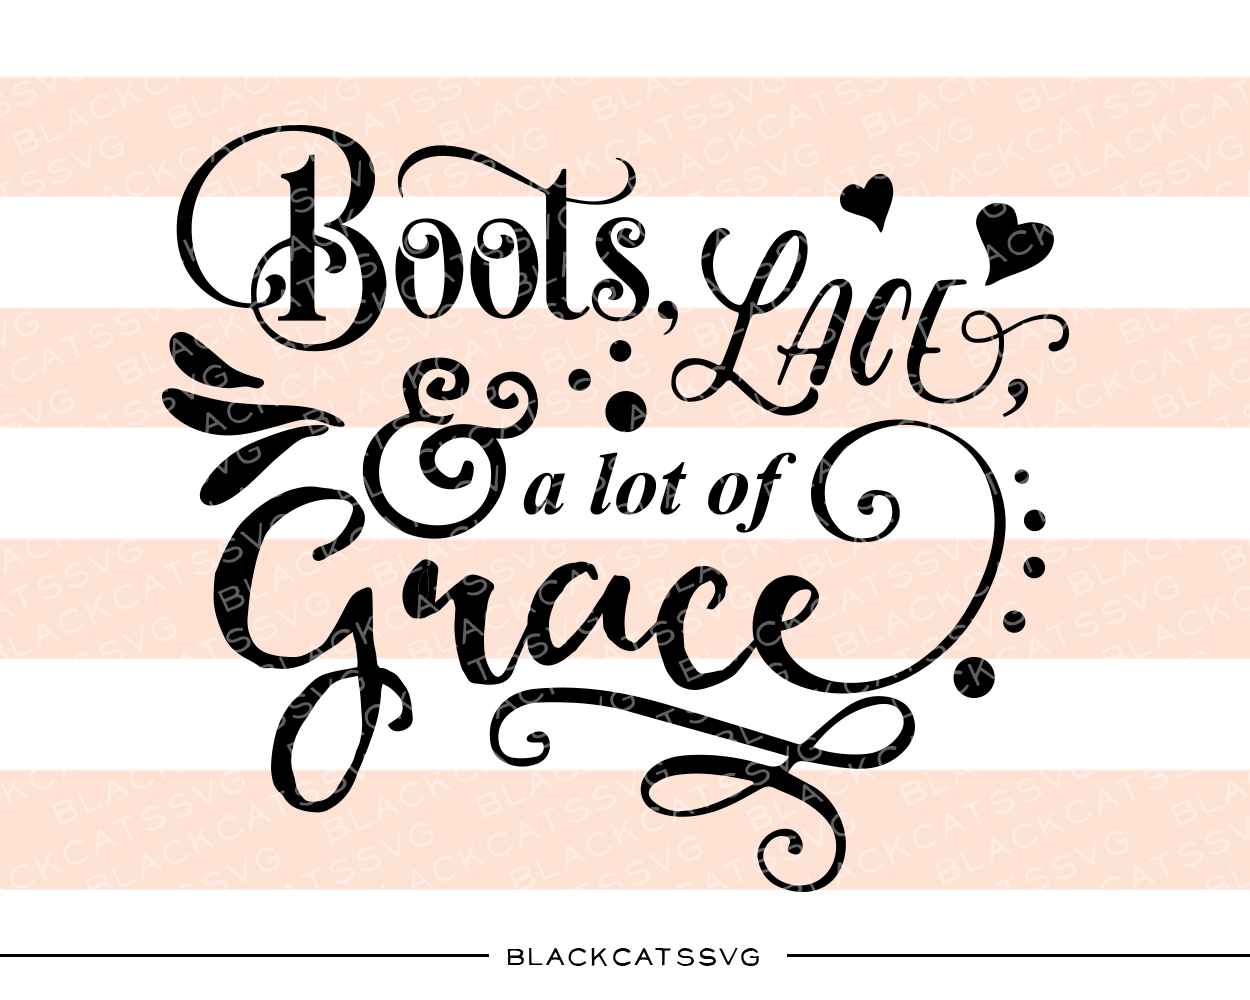 Boots, Lace & a Lot of Grace Cowgirl Craft Cut File By BlackCatsSVG